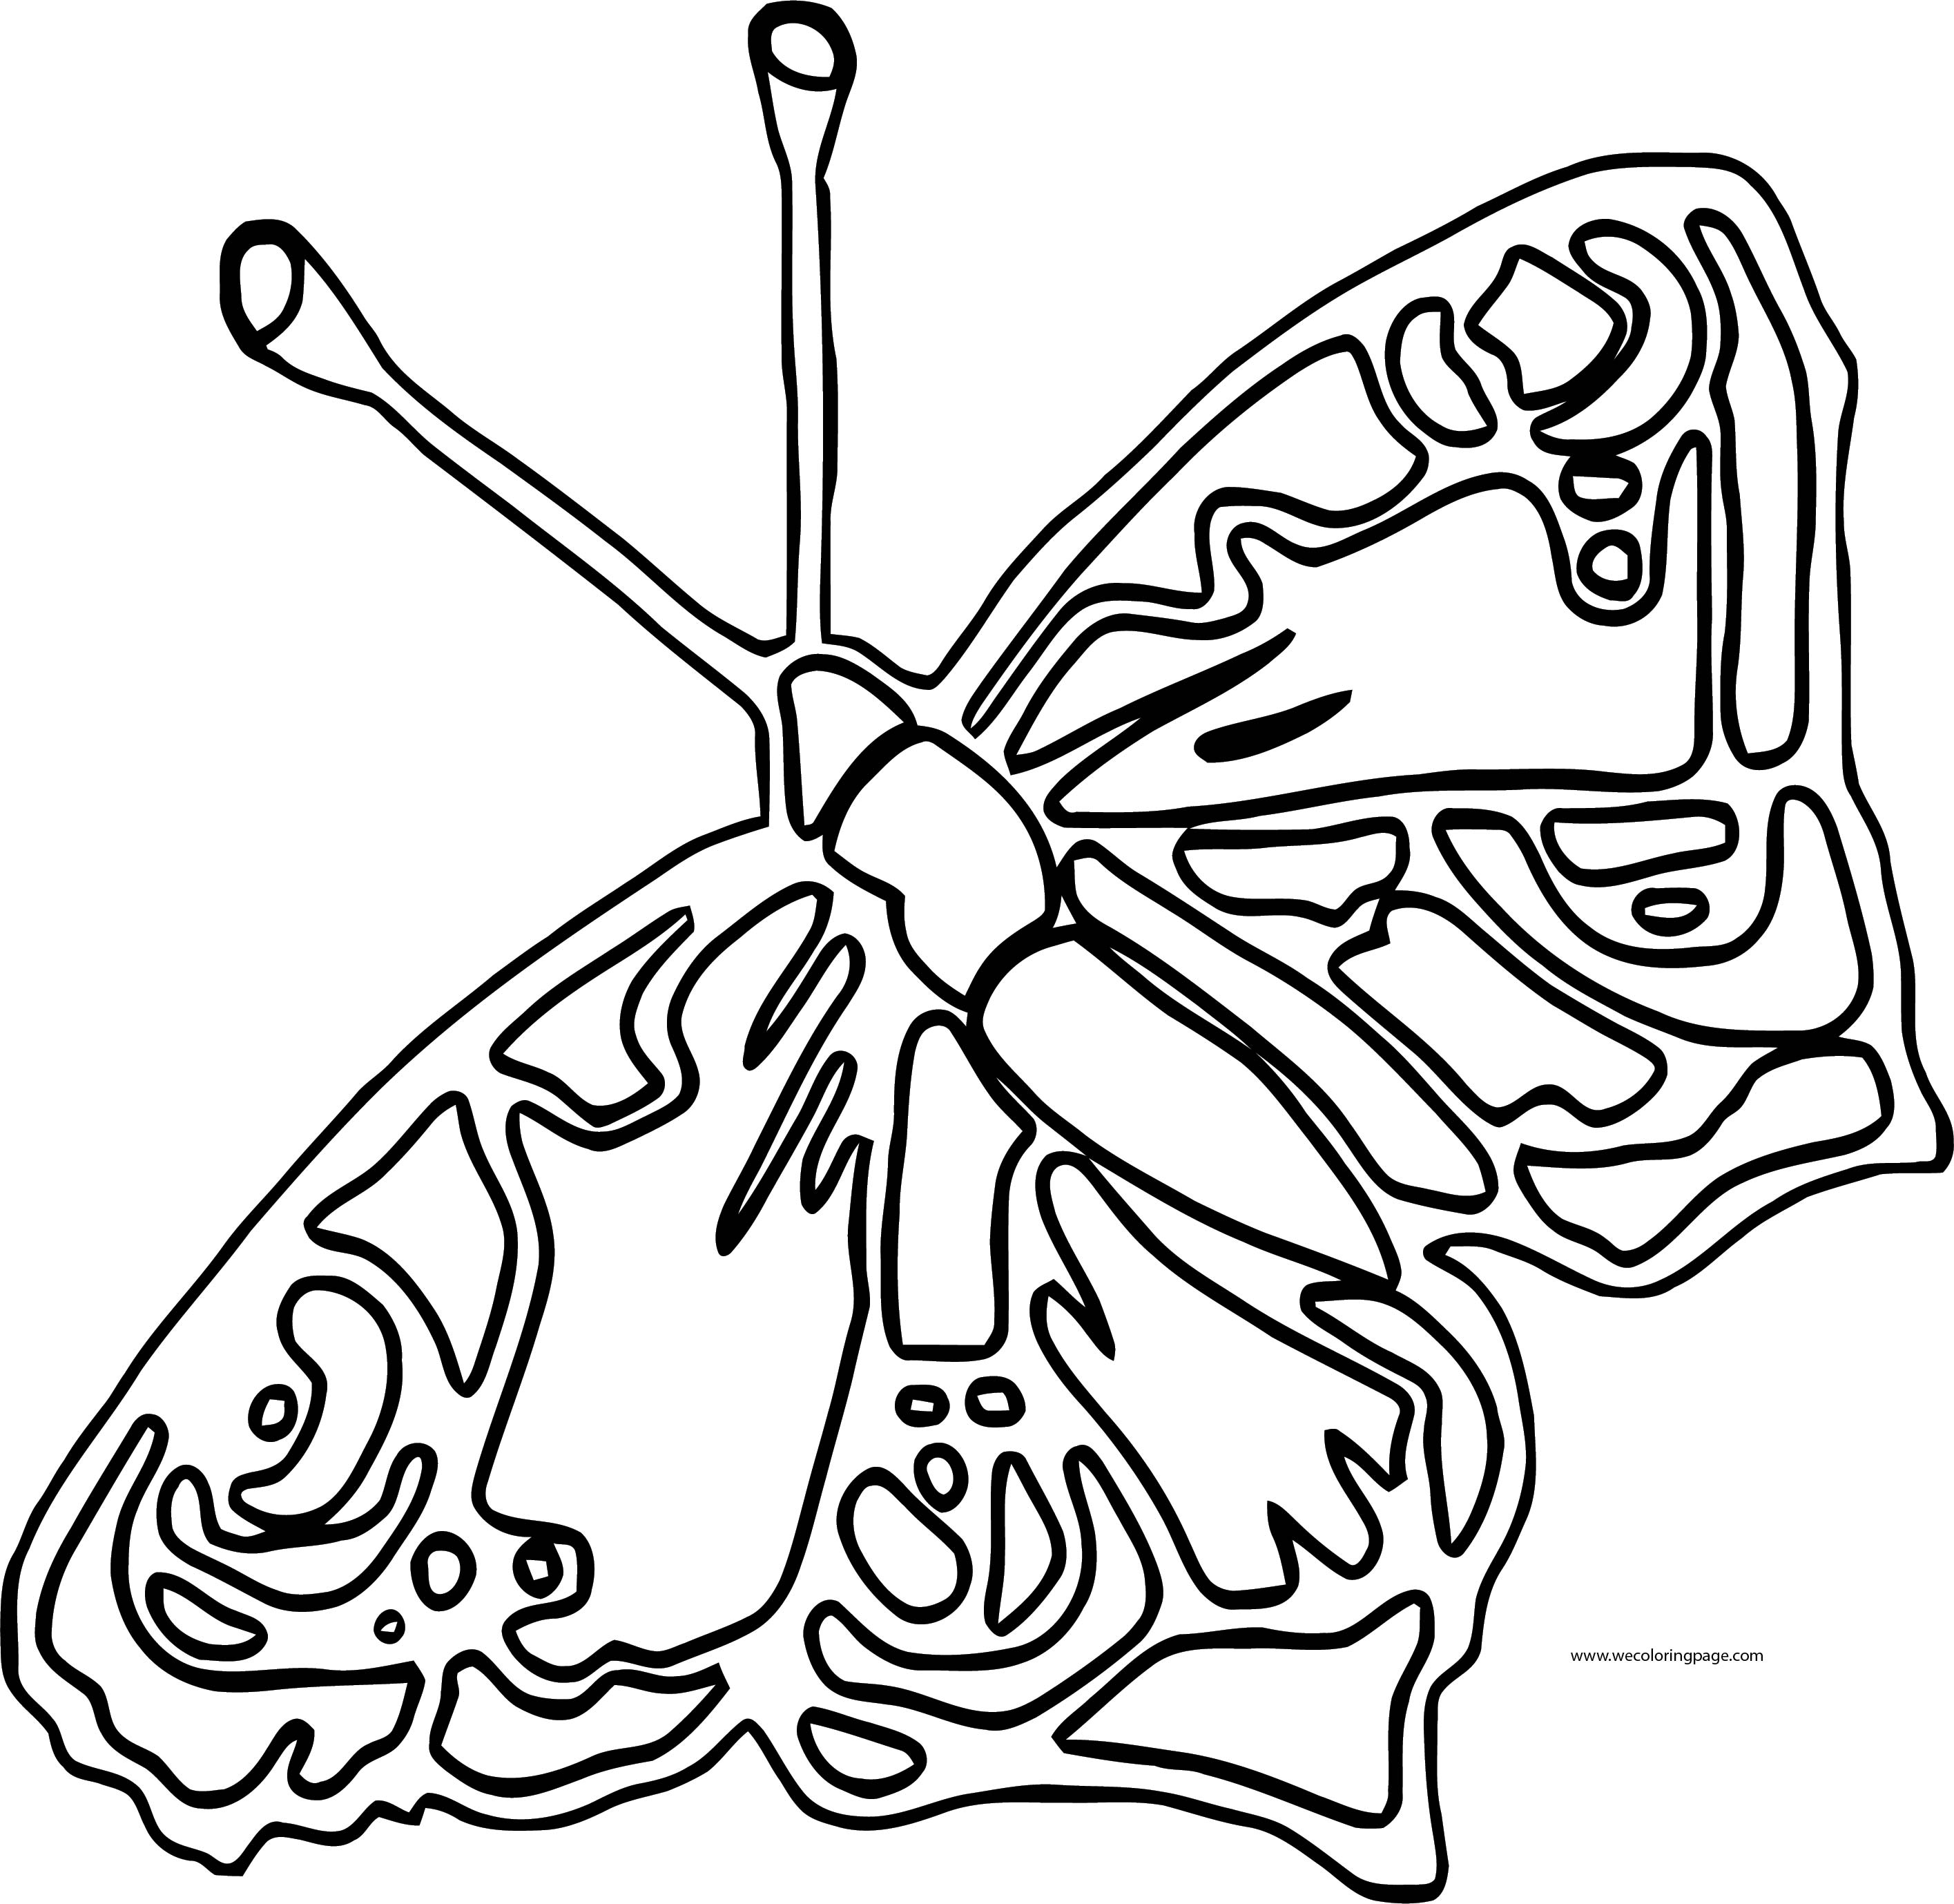 Outline Butterfly Coloring Page - Wecoloringpage.com